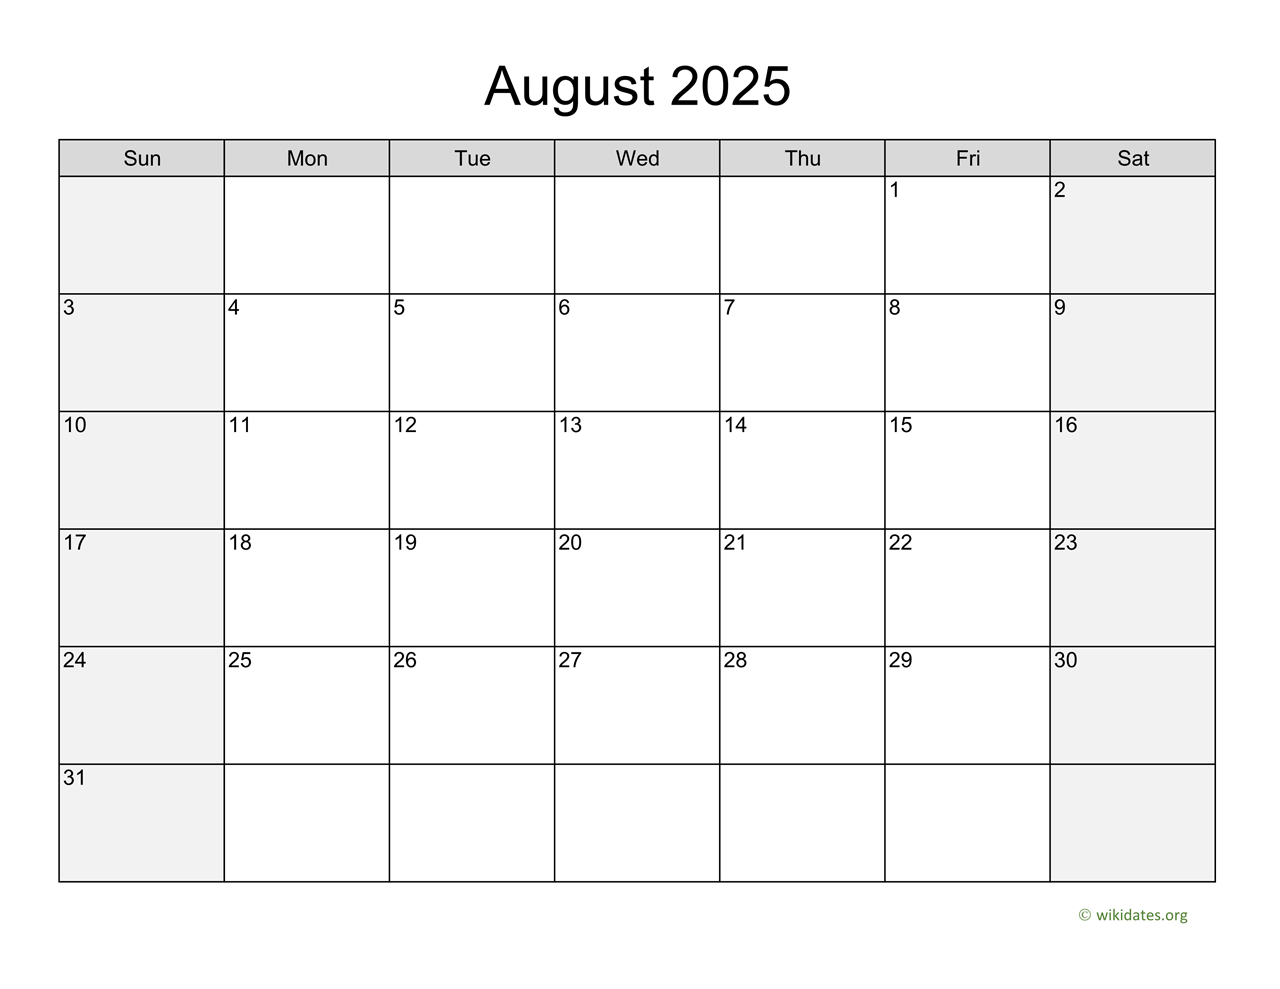 august-2025-calendar-with-weekend-shaded-wikidates